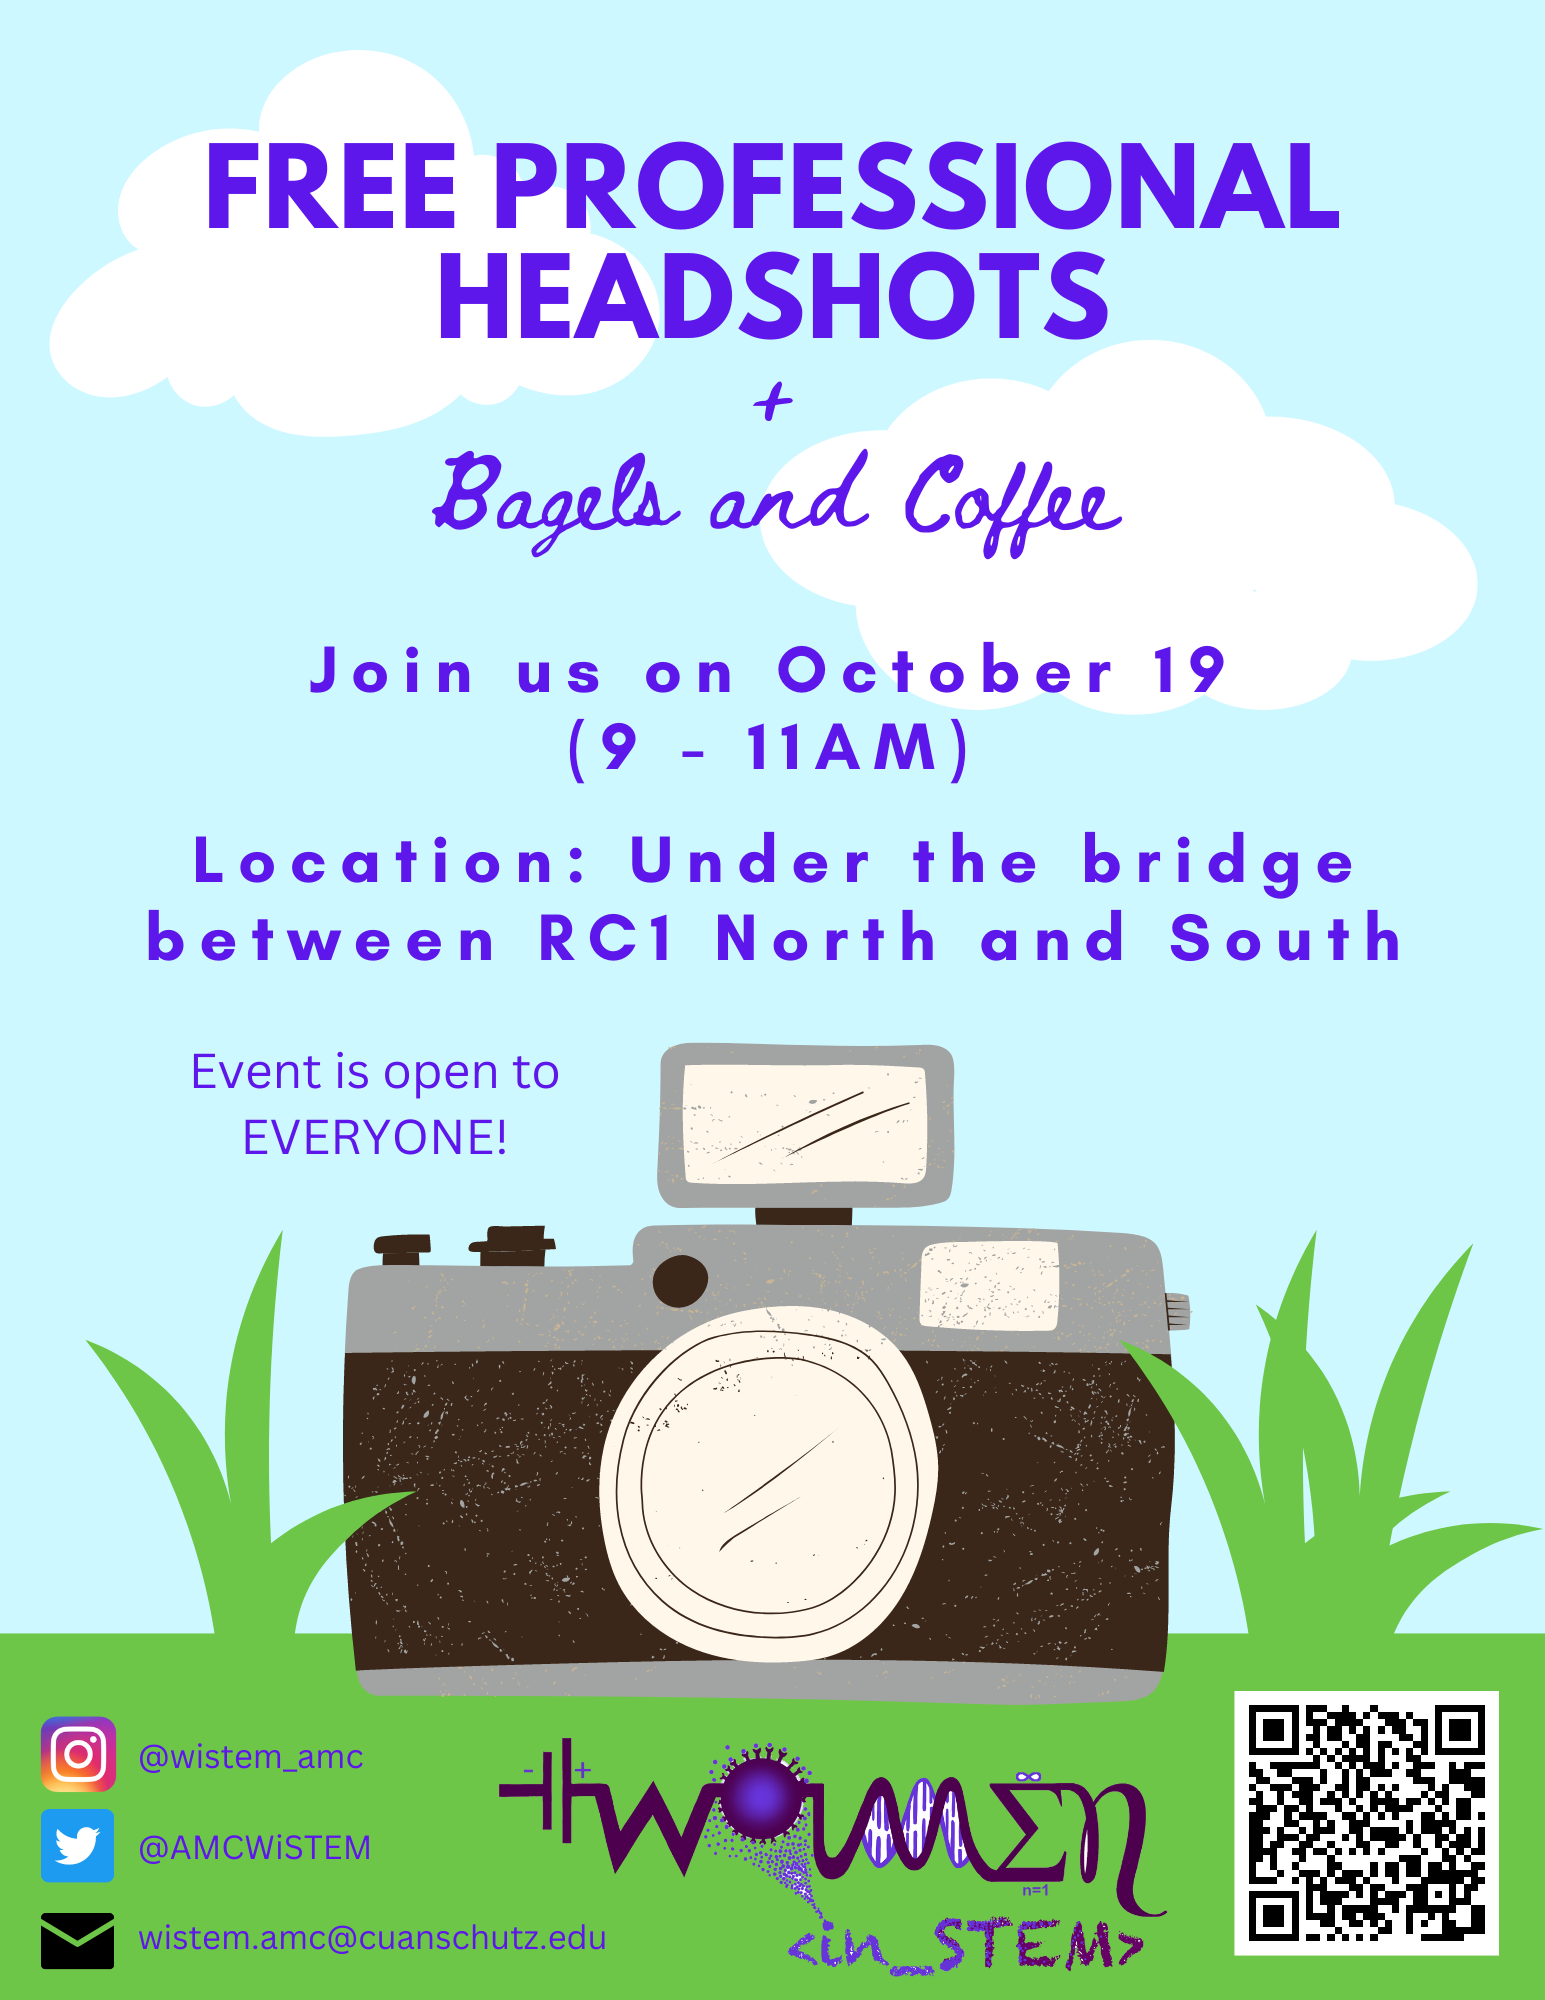 Flyer for free headshot event held on October 19, 2022